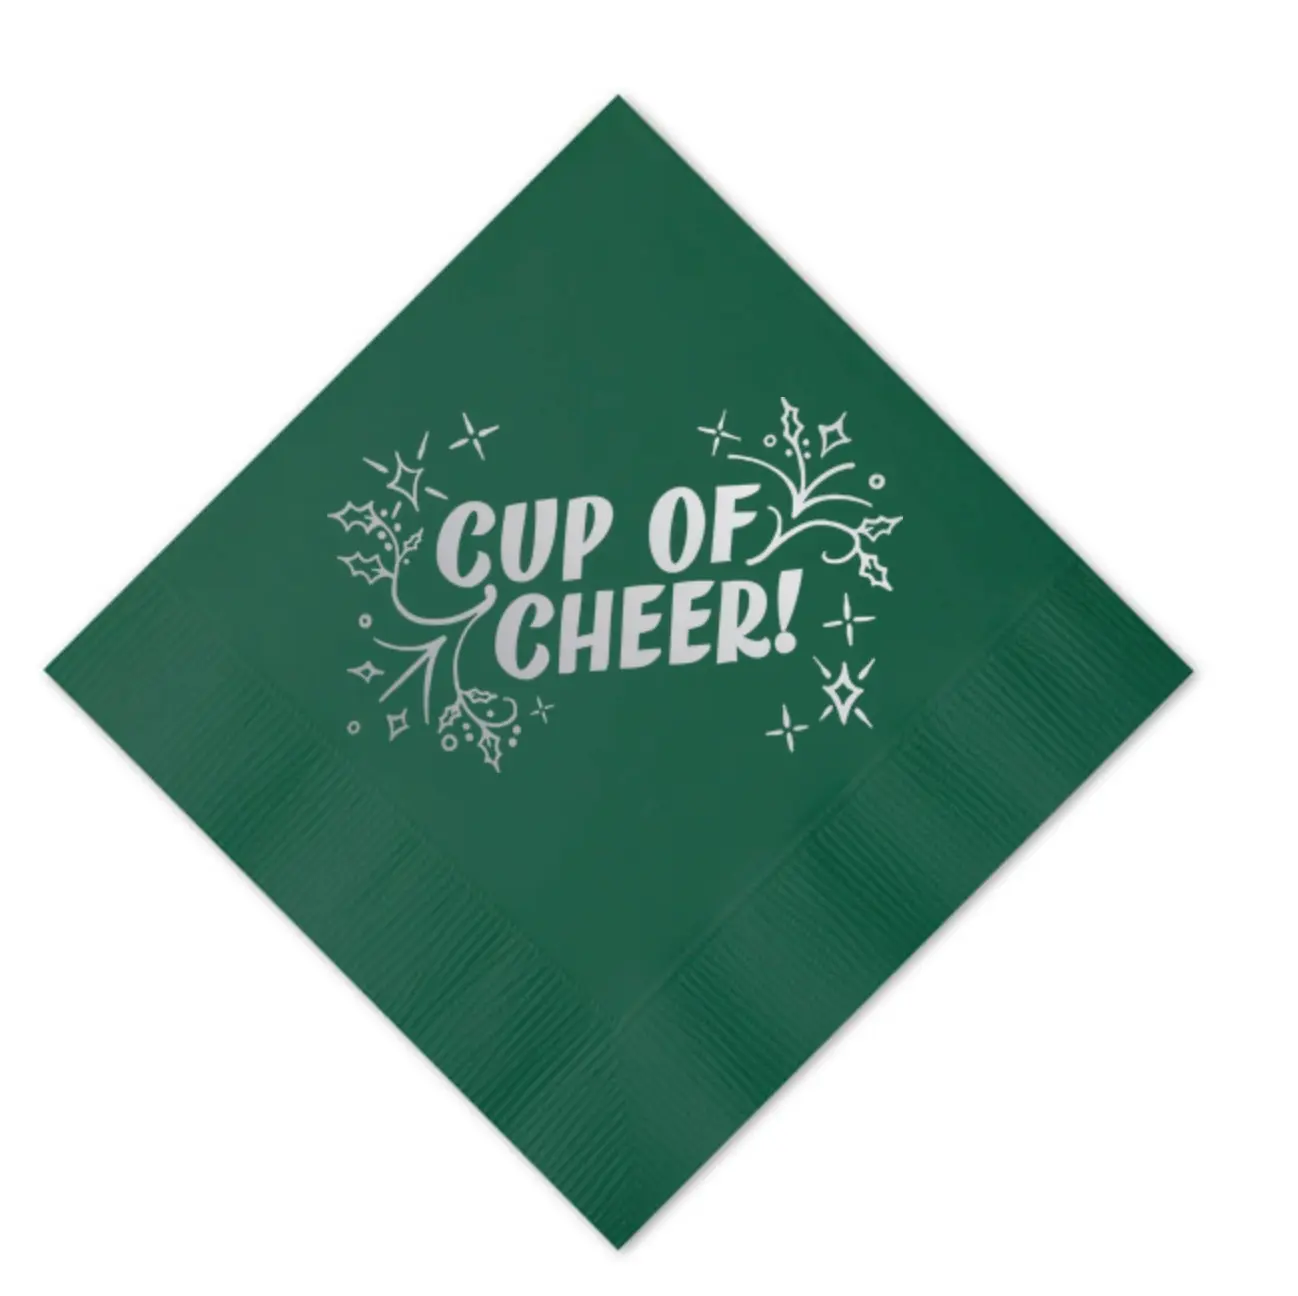 One & Only Paper - OAO OAO PSNA - Cup of Cheer Green Cocktail Napkin